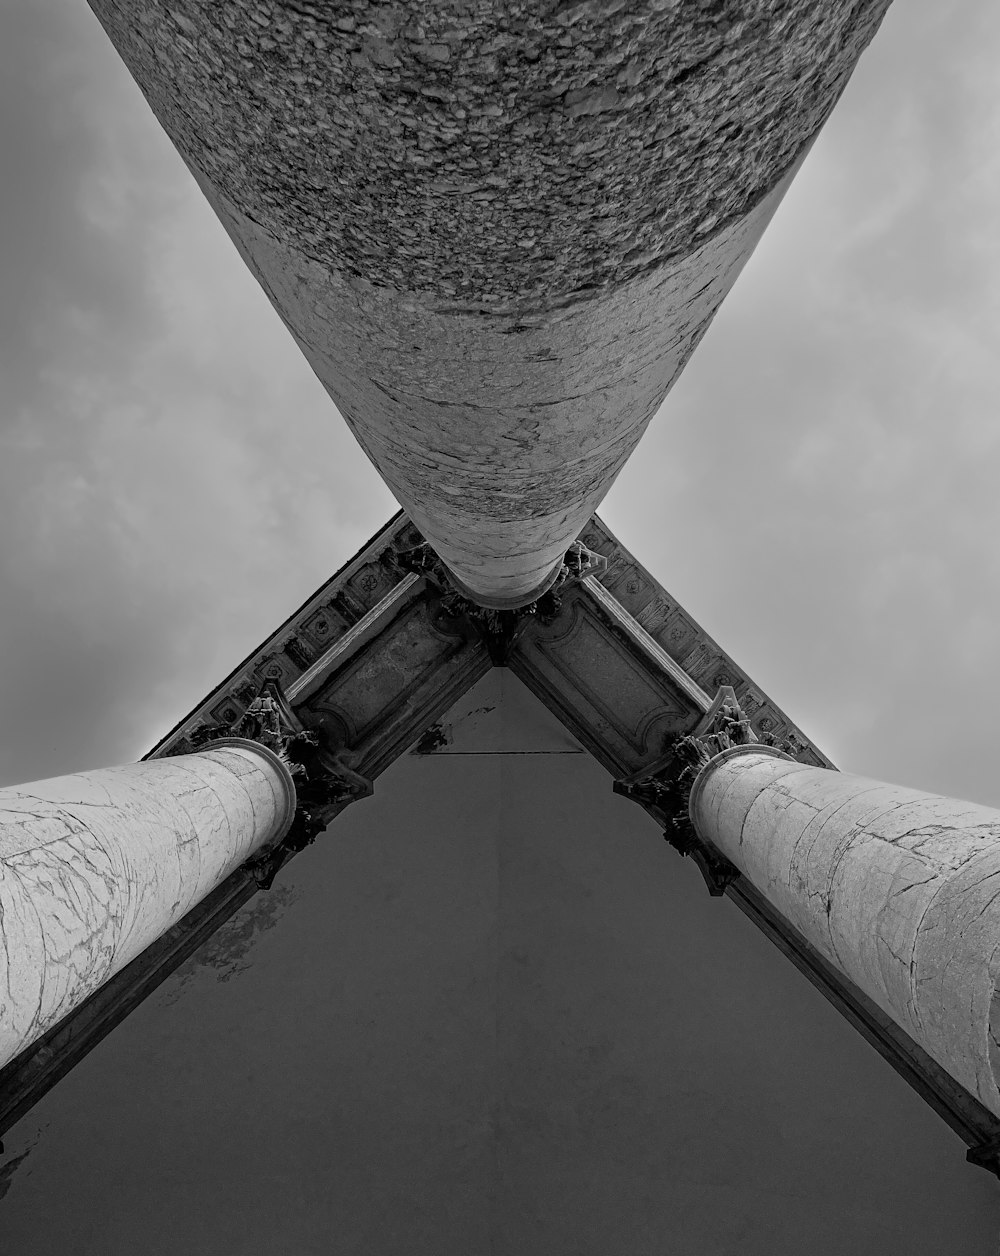 a black and white photo looking up at the top of a tower